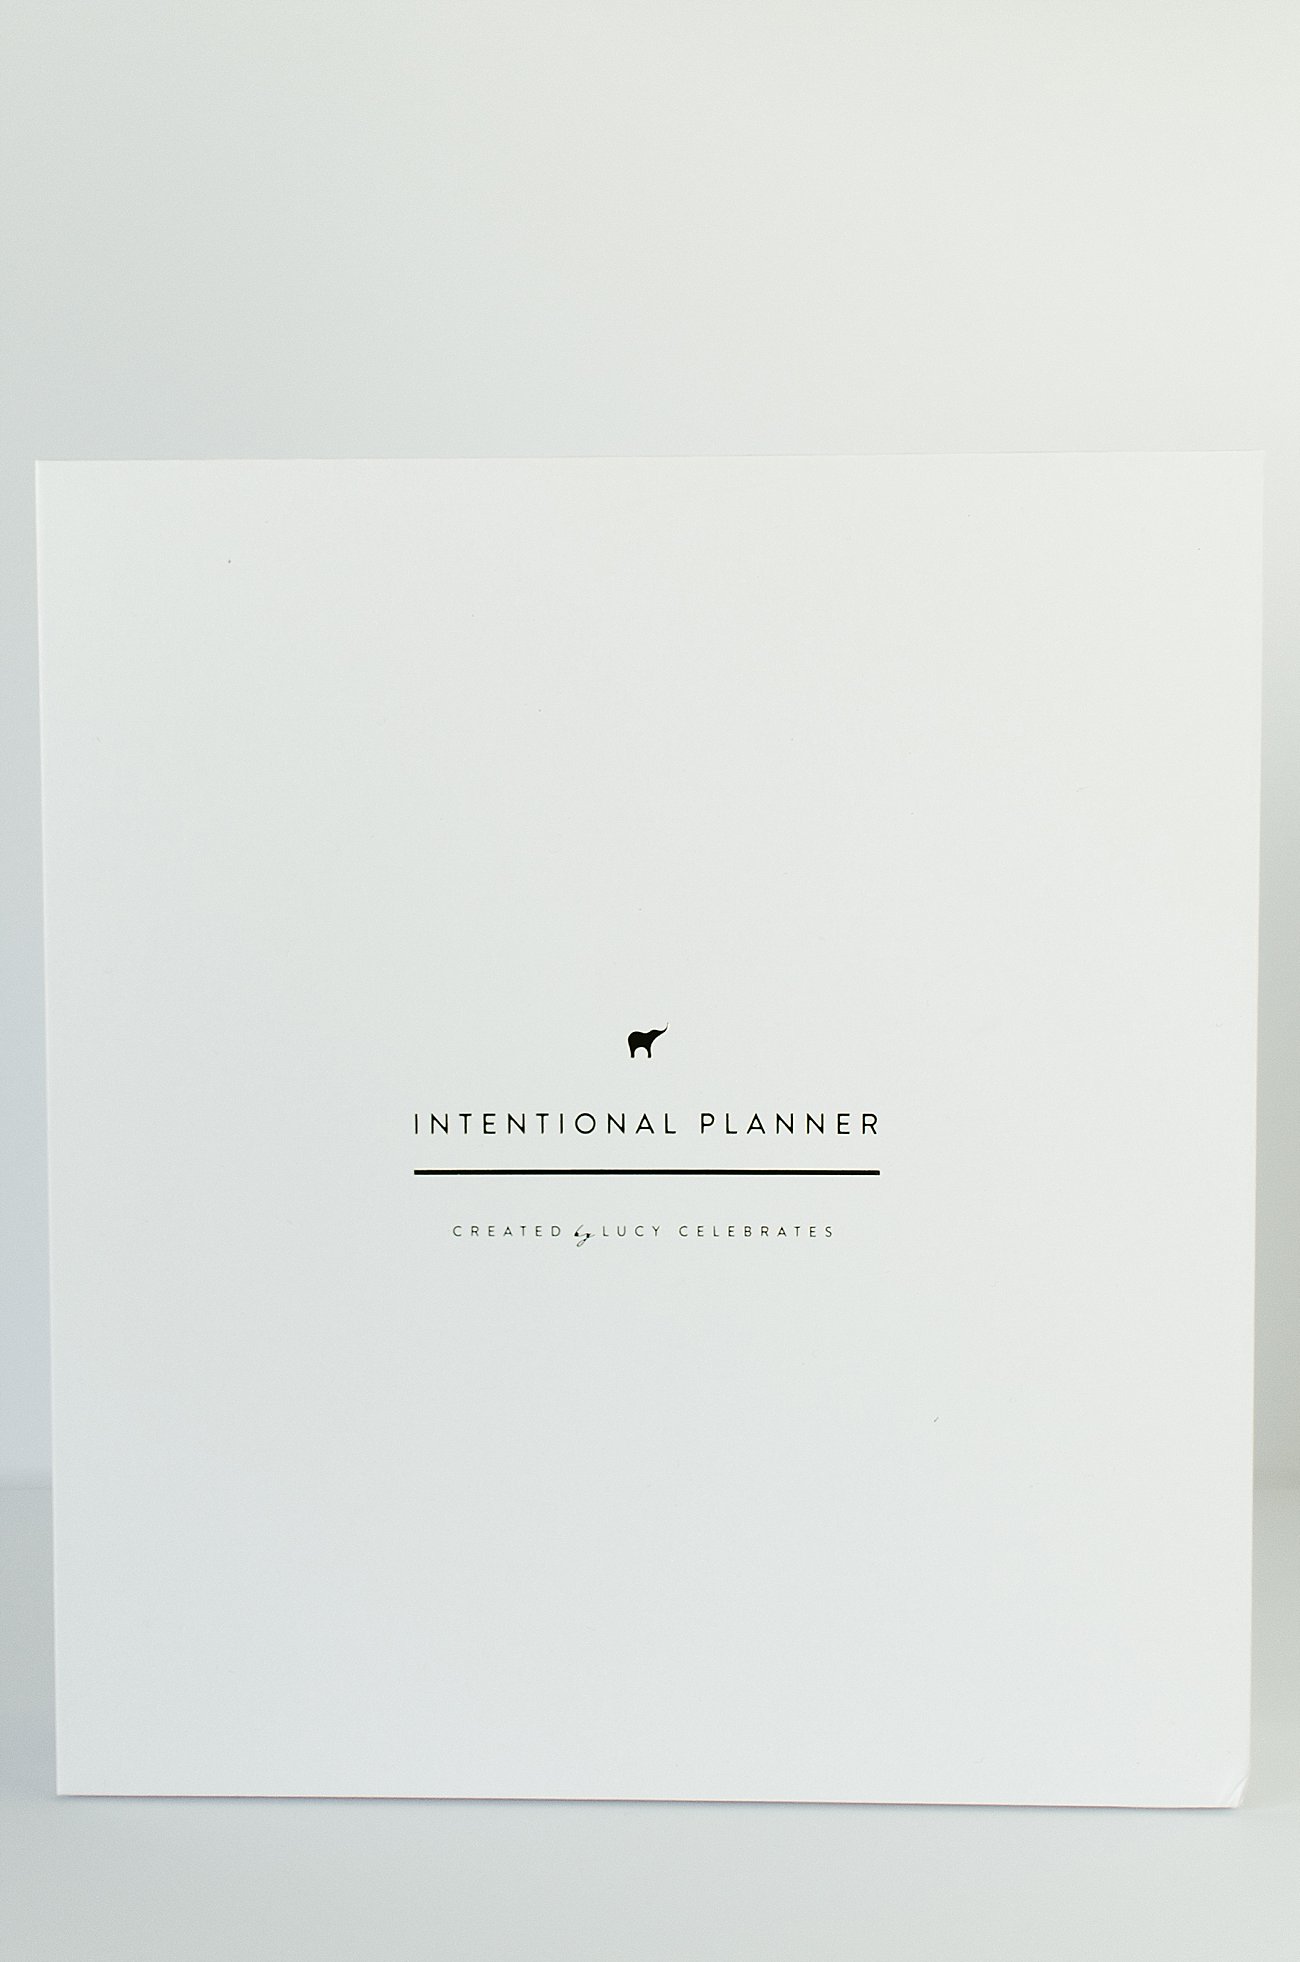 Taking on 2017 with The Intentional Planner | Intentional Planner Review - Christian Planner and Prayer Journal Review (2)